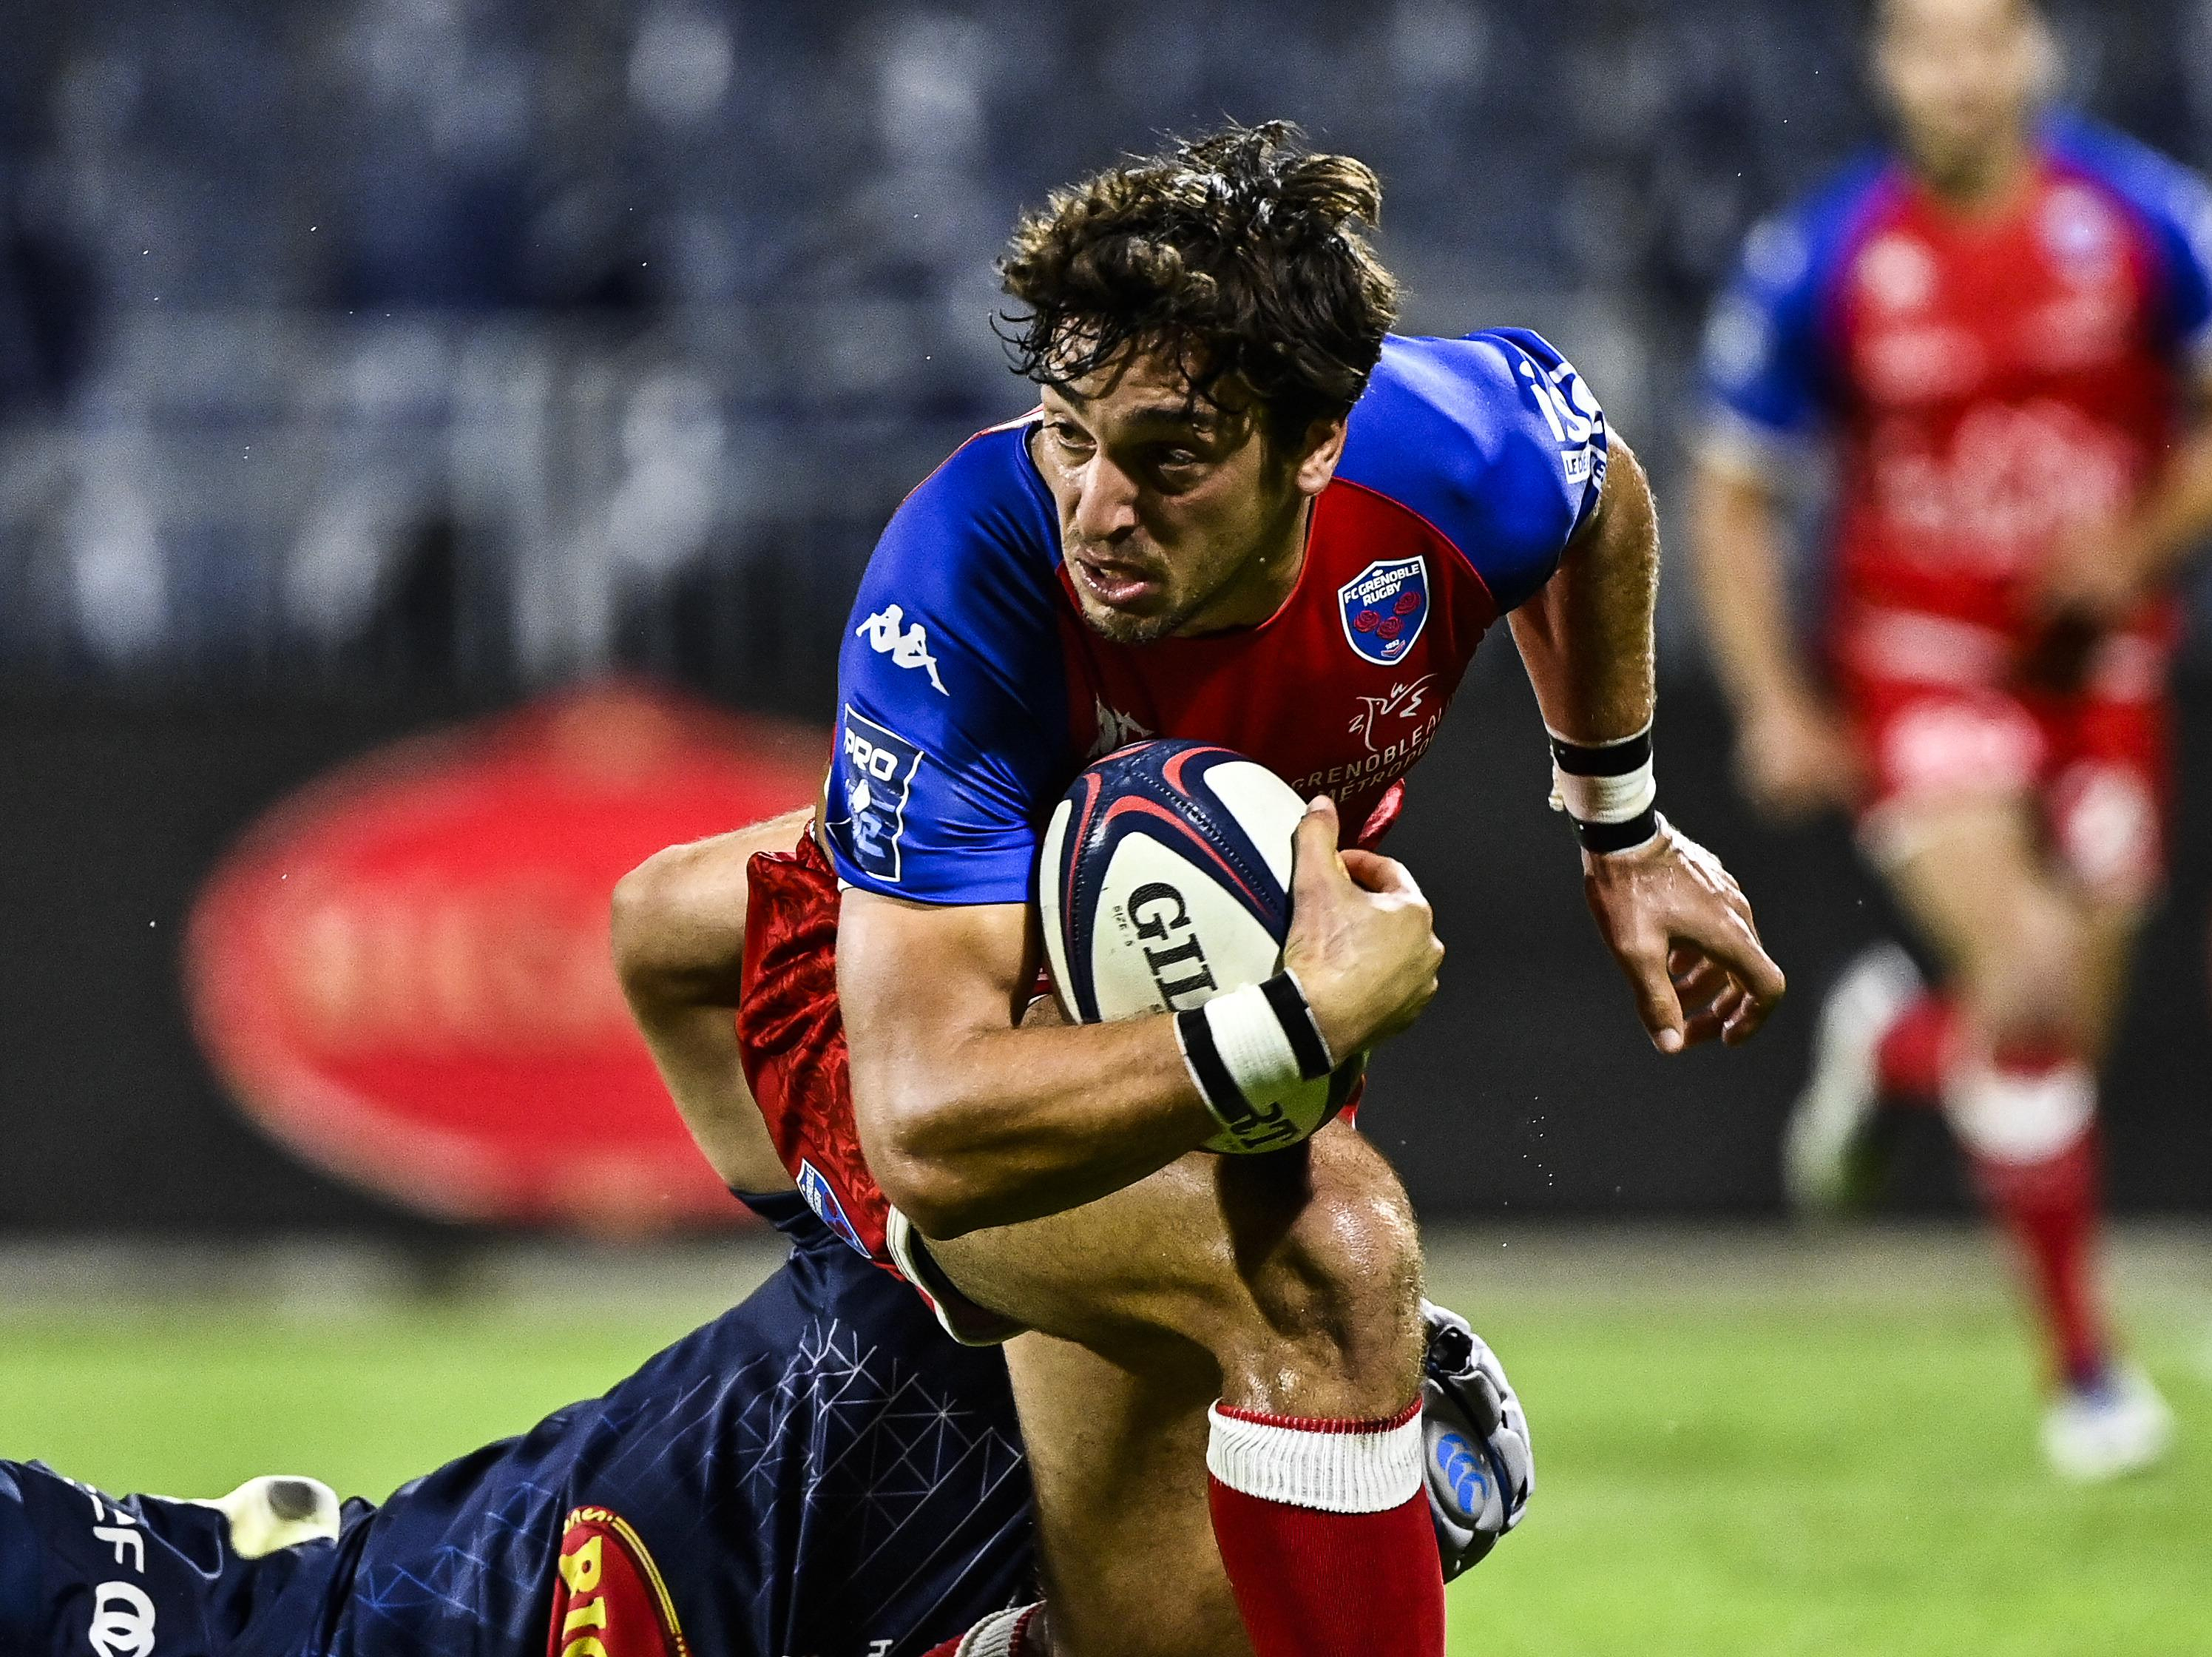 Pro D2: Grenoble hits hard by crushing Provence Rugby